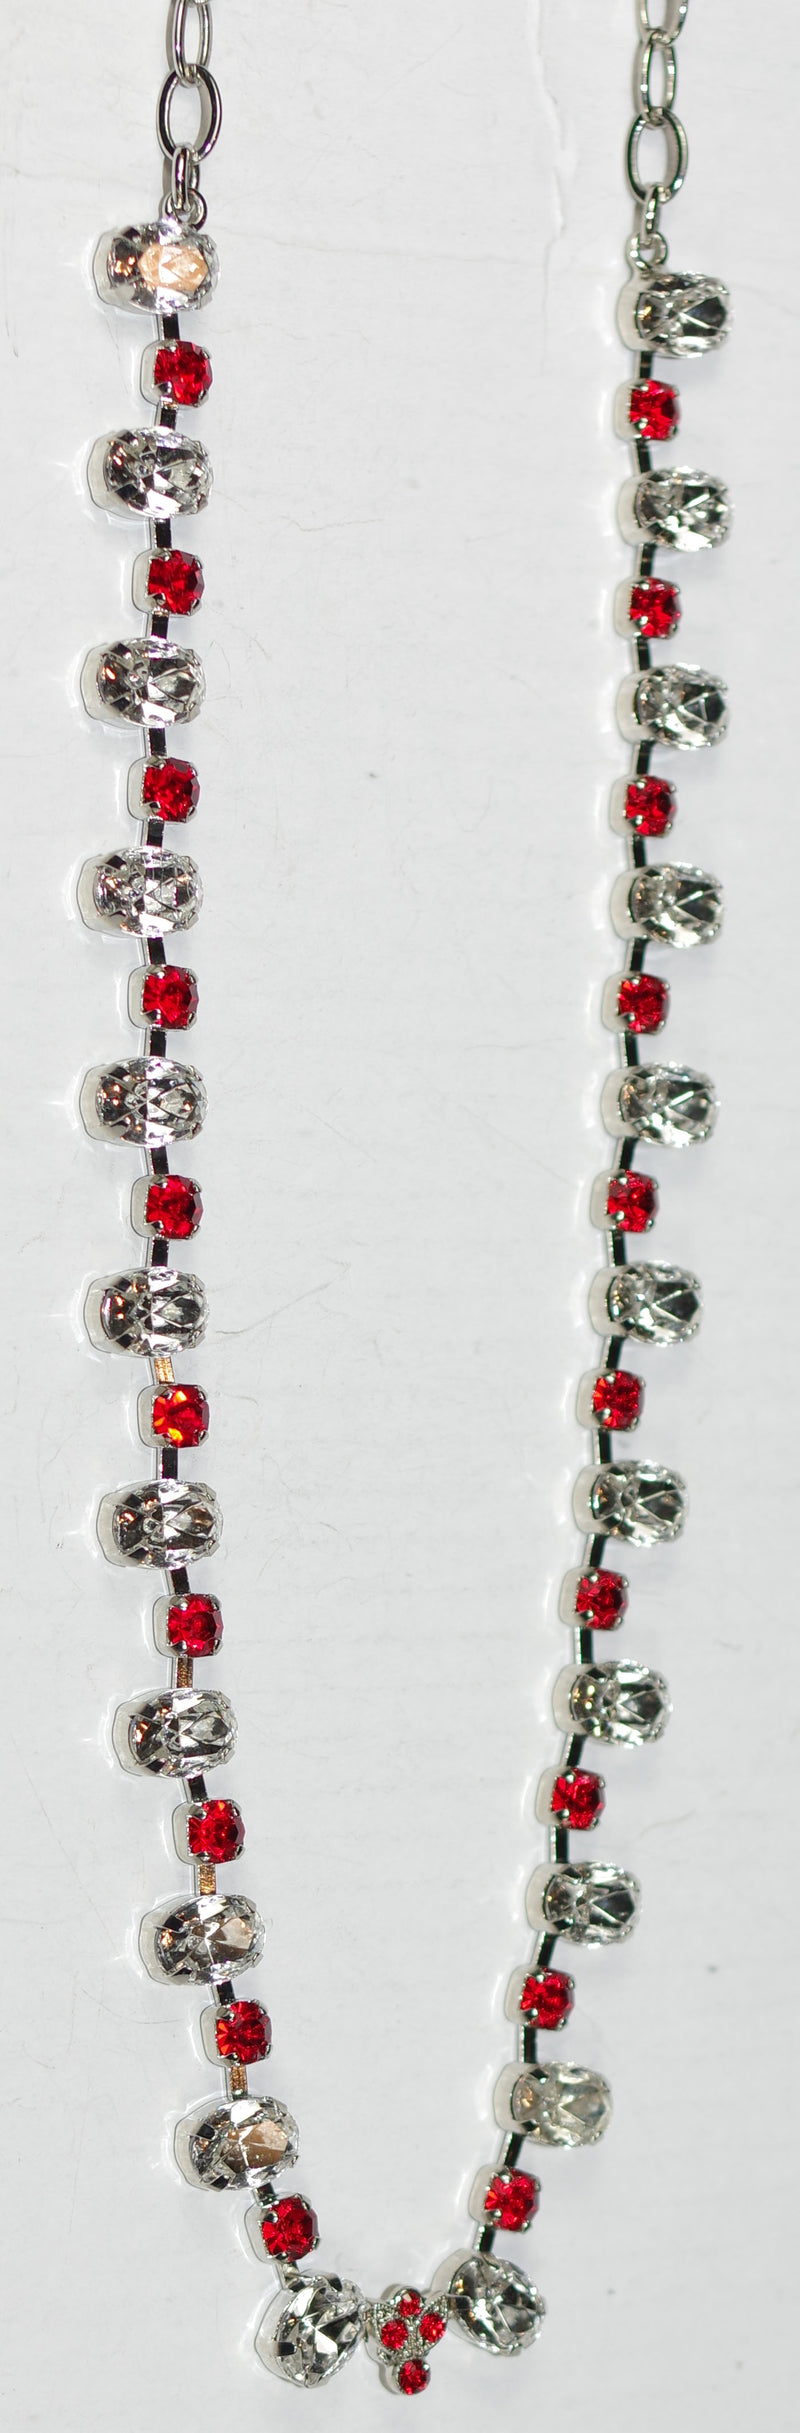 MARIANA NECKLACE RED/CLEAR: red, clear stones in silver rhodium setting, 18" adjustable chain